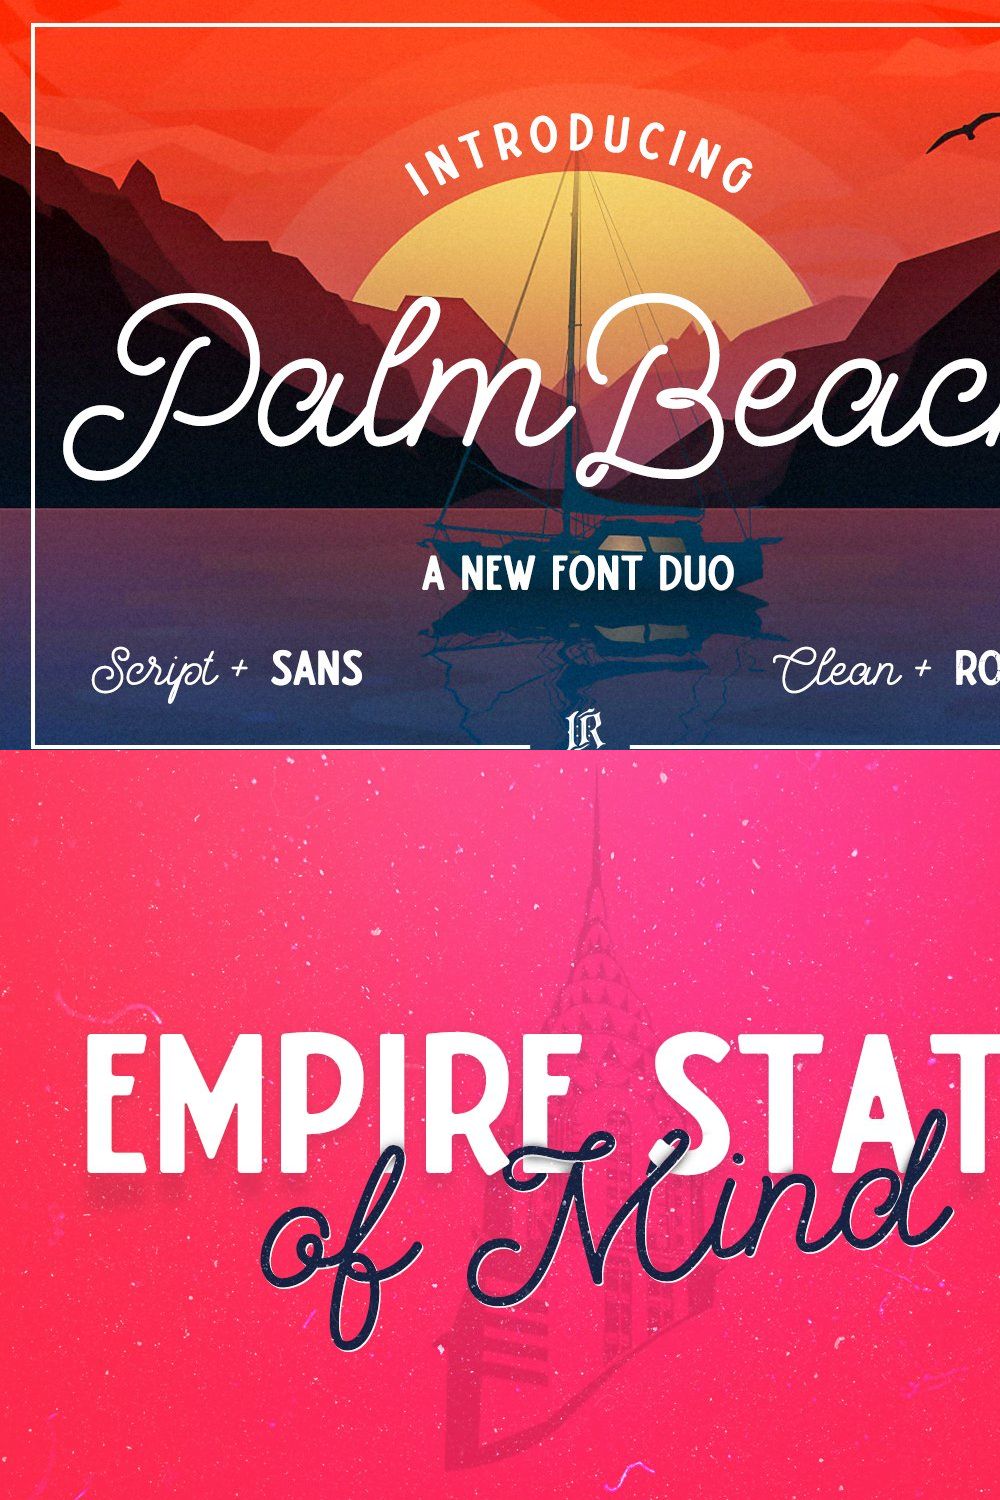 Palm Beach Font Duo pinterest preview image.